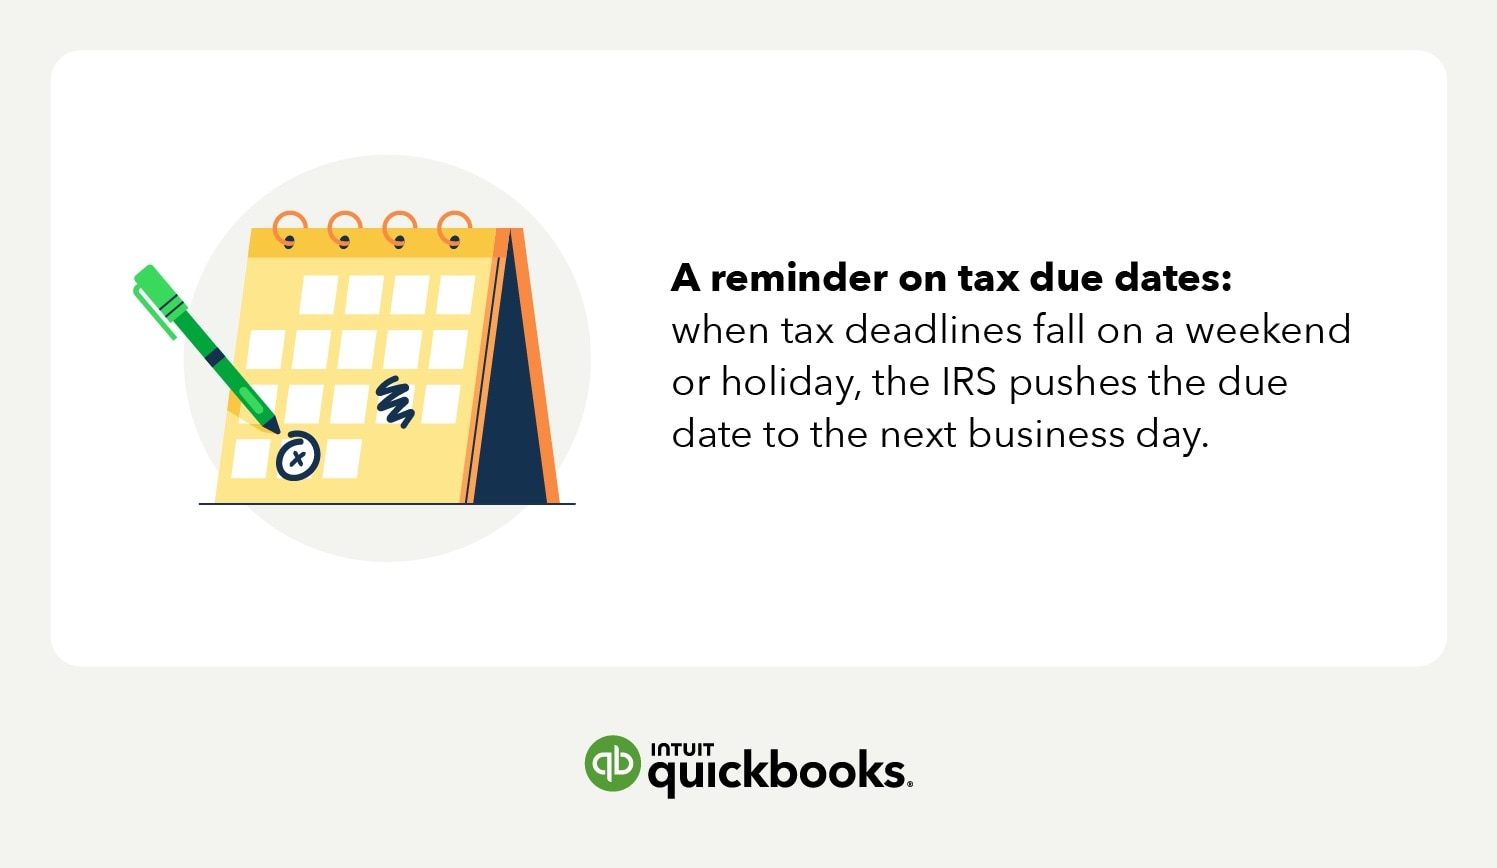 A reminder on tax due dates: when tax deadlines fall on a weekend or holiday, the IRS pushes the due date to the next business day.